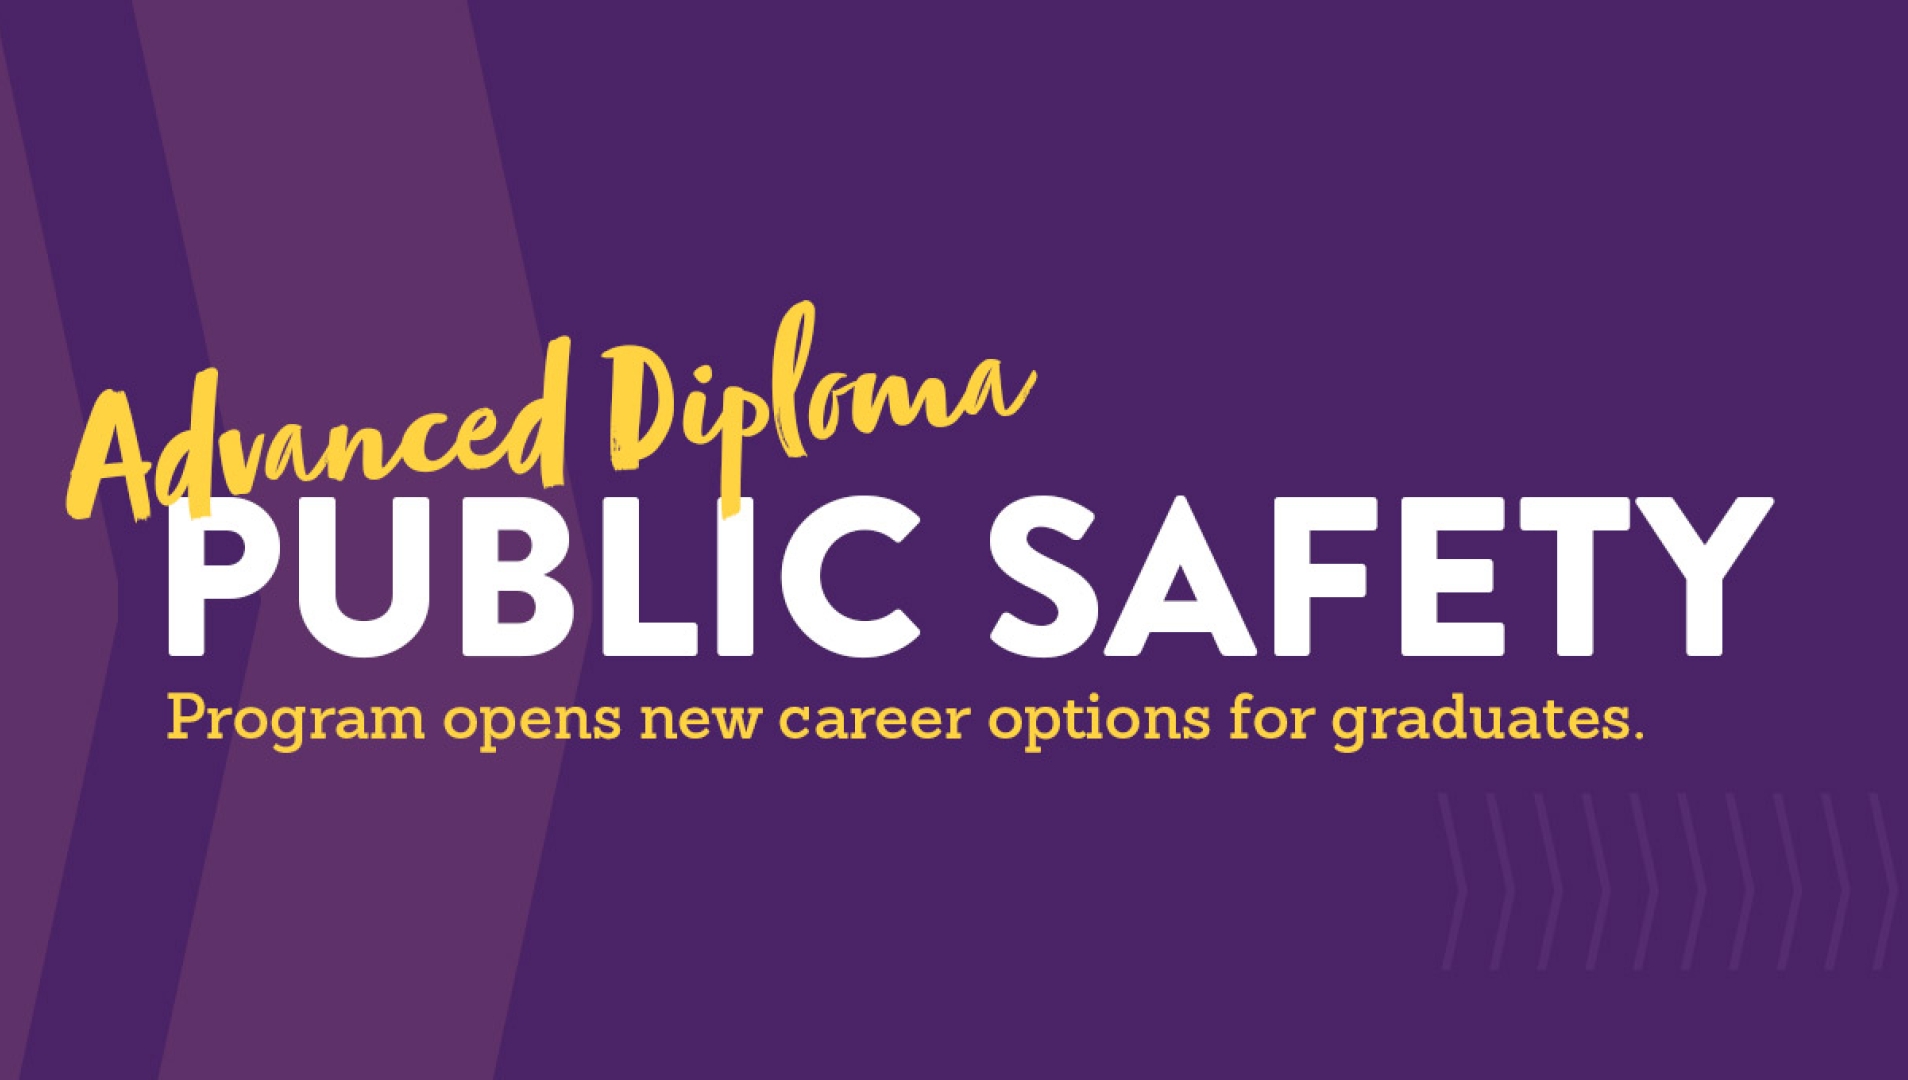 Public Safety Advanced Diploma program opens new career options for graduates, written on a purple background.